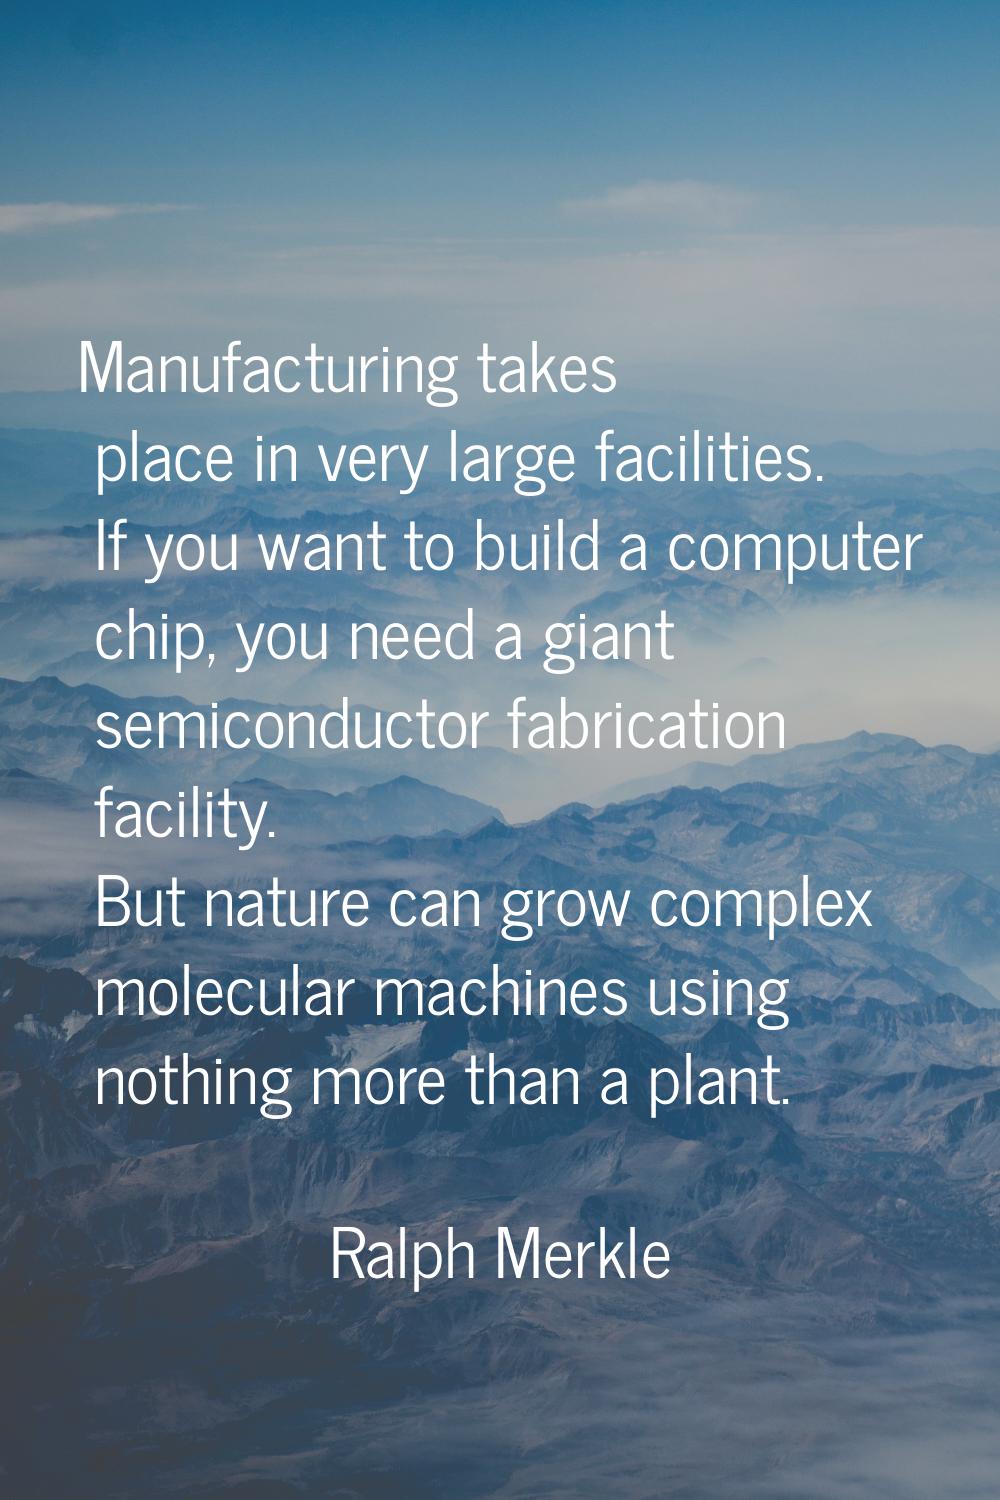 Manufacturing takes place in very large facilities. If you want to build a computer chip, you need 